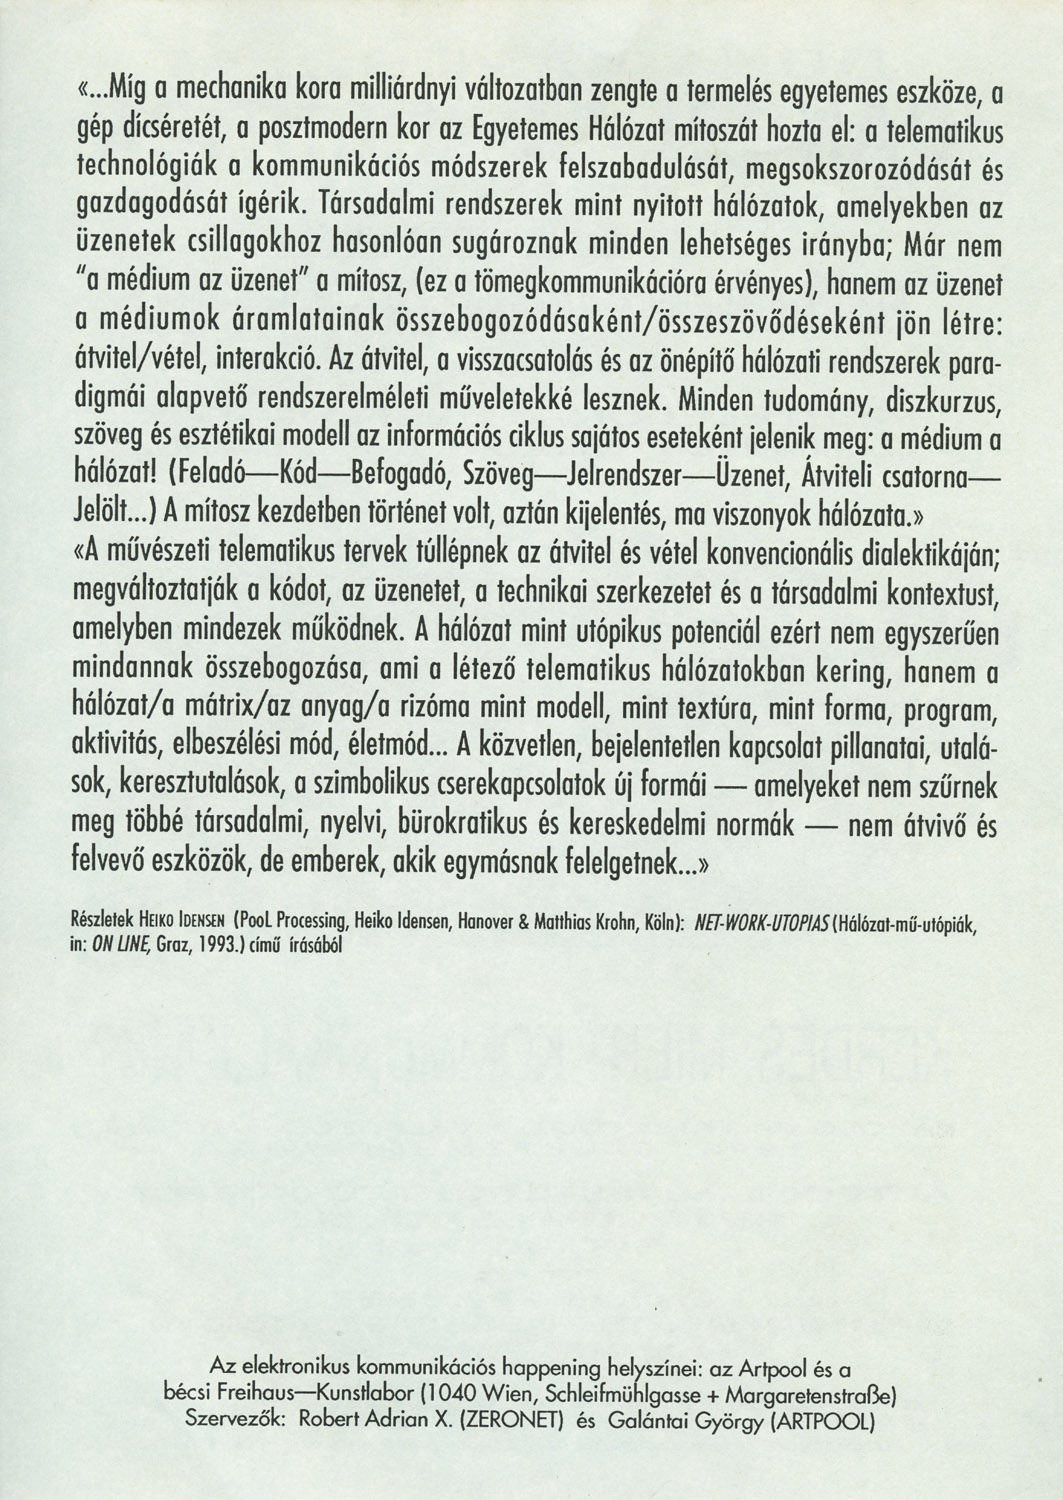 Invitation/Call/ by Artpool for Danube Connection, 1993 (Hungarian version) (1st and 2nd page)